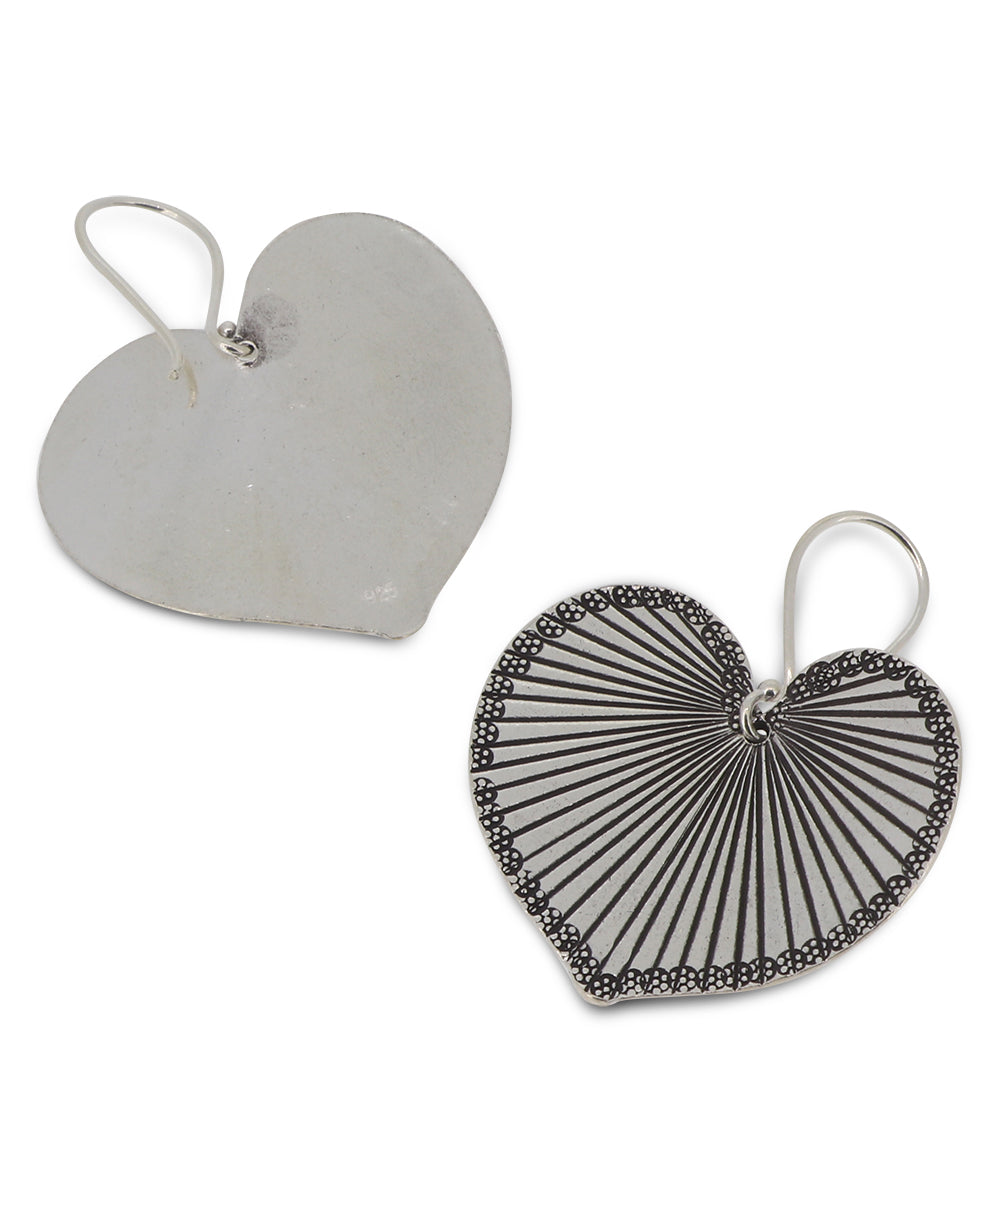 Ethically sourced silver betel leaf earrings from Laos, showcasing intricate craftsmanship